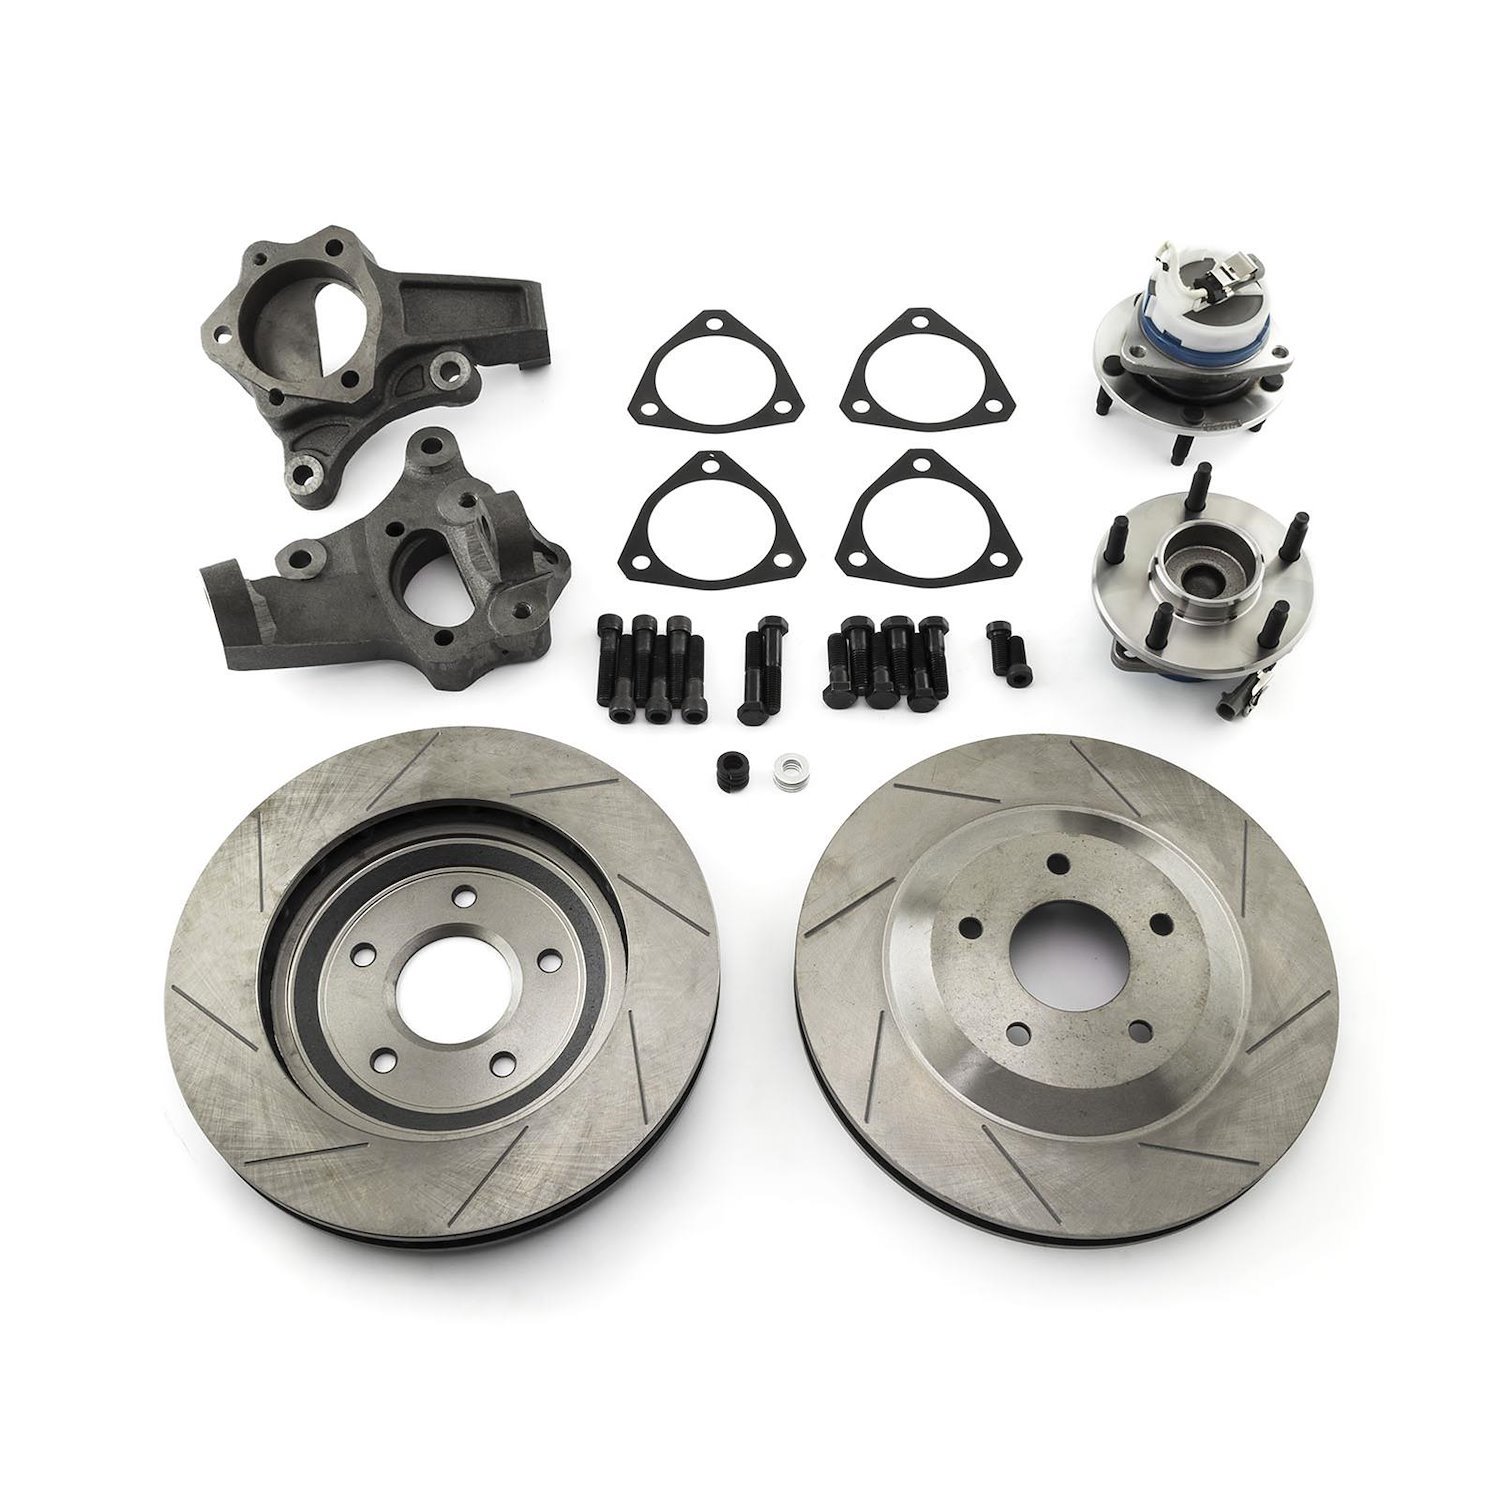 GM C5 CORVETTE 13 DRILLED SLOTTED FRONT DISC BRAKE CONVERSION KIT HUB AND SPINDLES ONLY